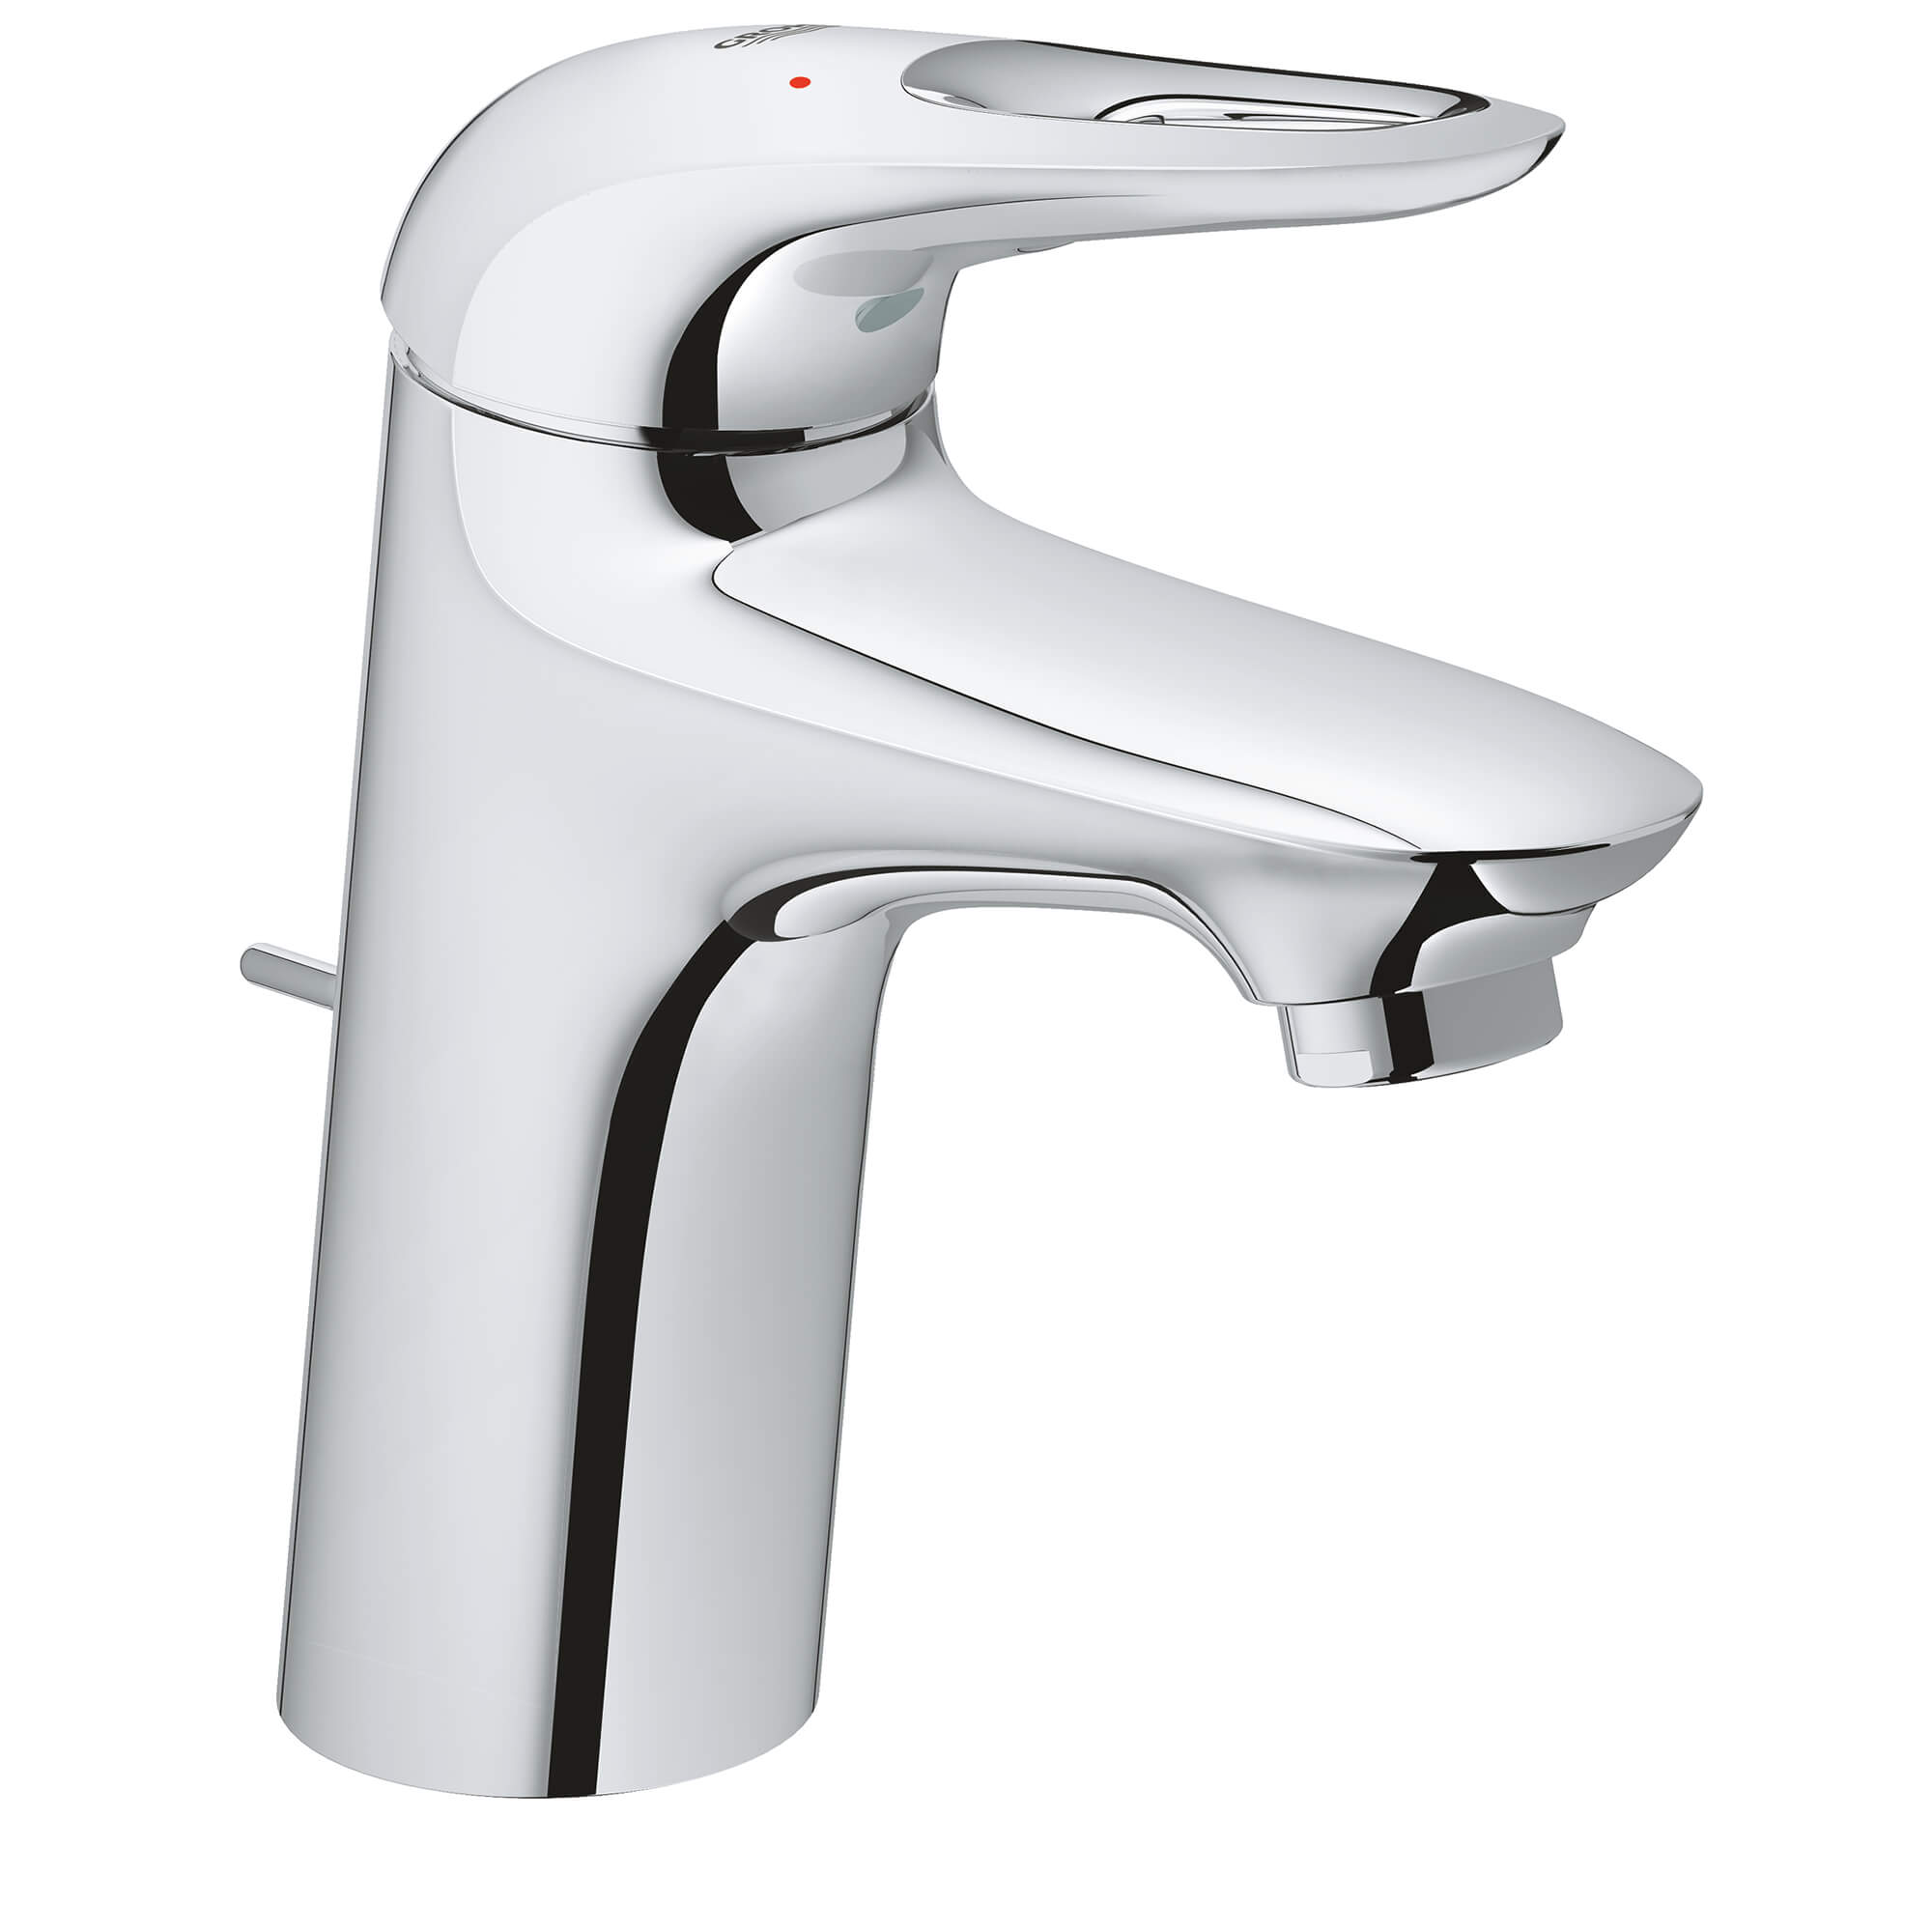 GROHE Eurostyle Chrome 1-handle Single Hole WaterSense Low-arc Bathroom Sink Faucet with Drain